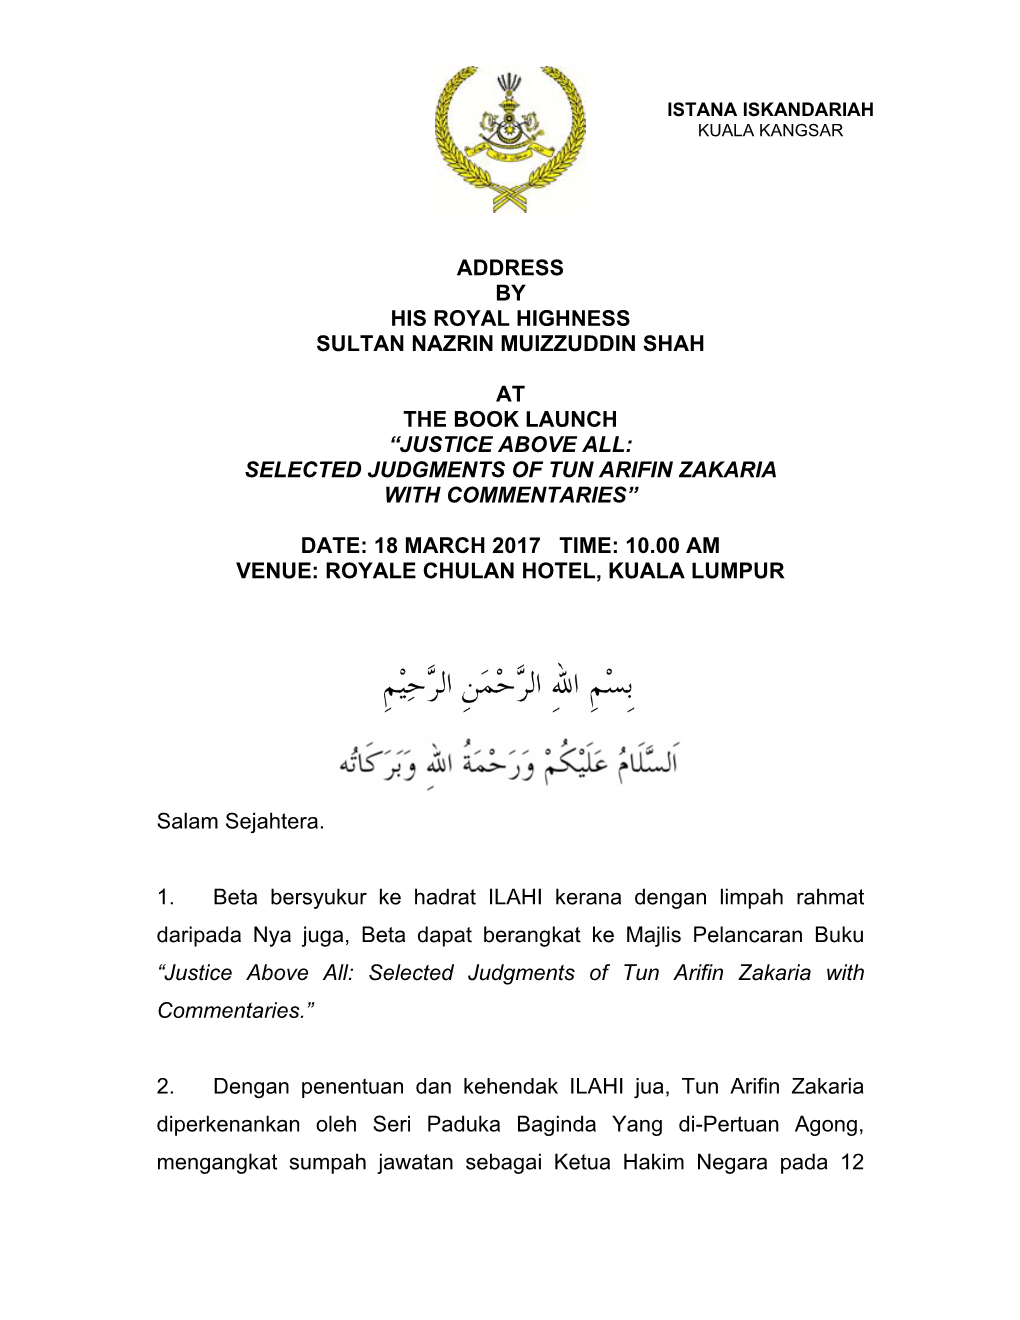 Address by His Royal Highness Sultan Nazrin Muizzuddin Shah